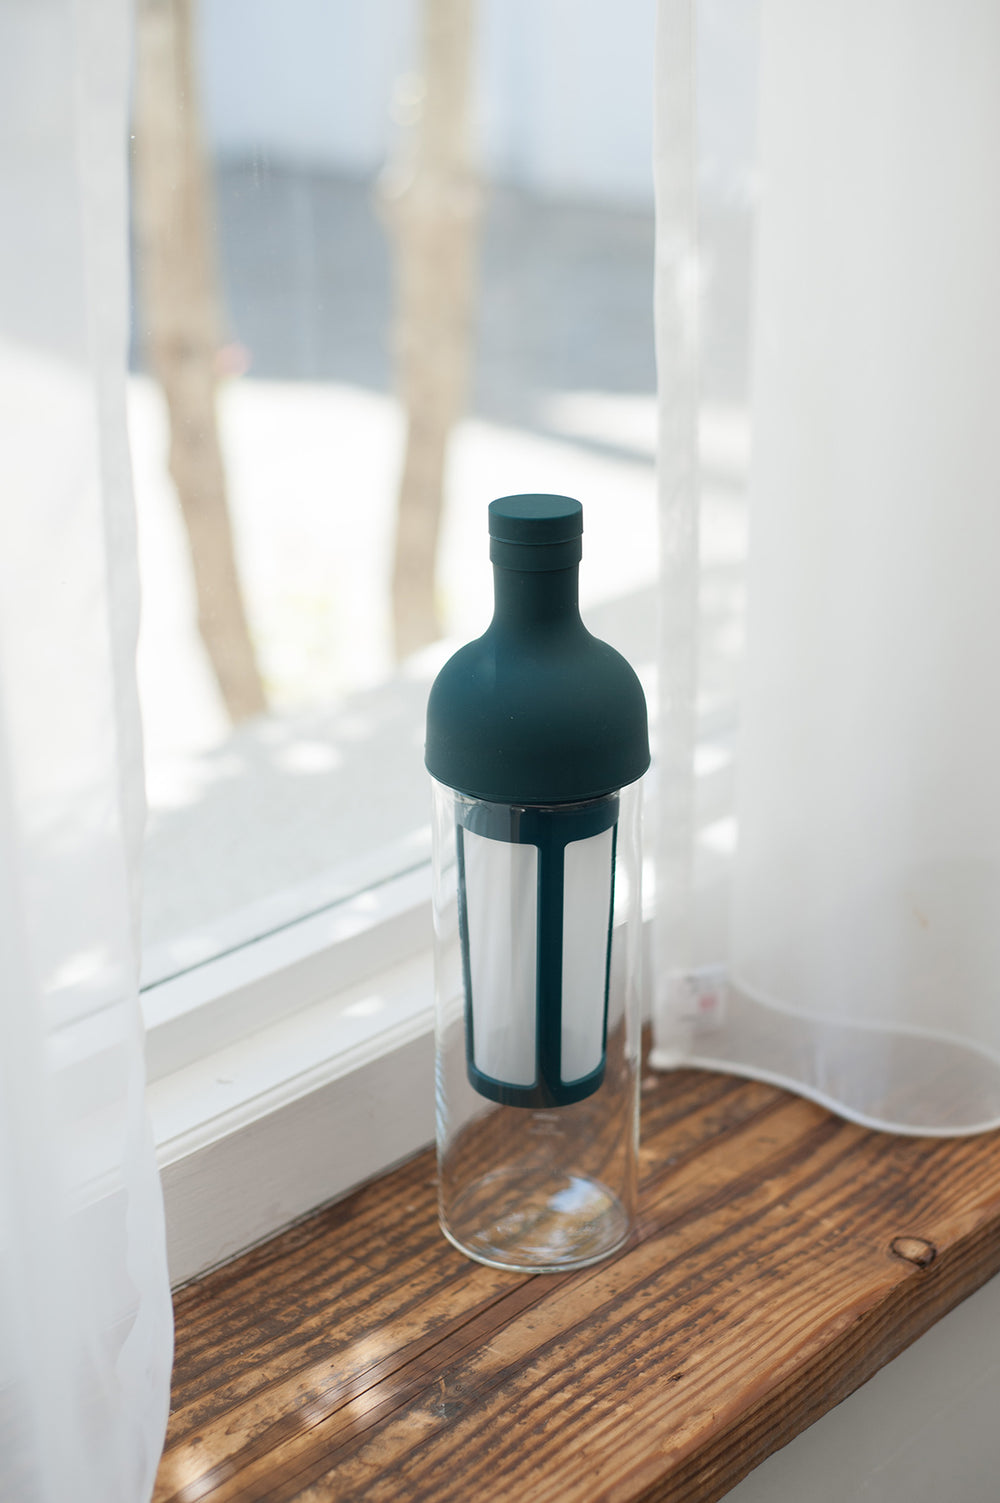 Hario Cold Brew Coffee Filter in Bottle (Deep Teal)